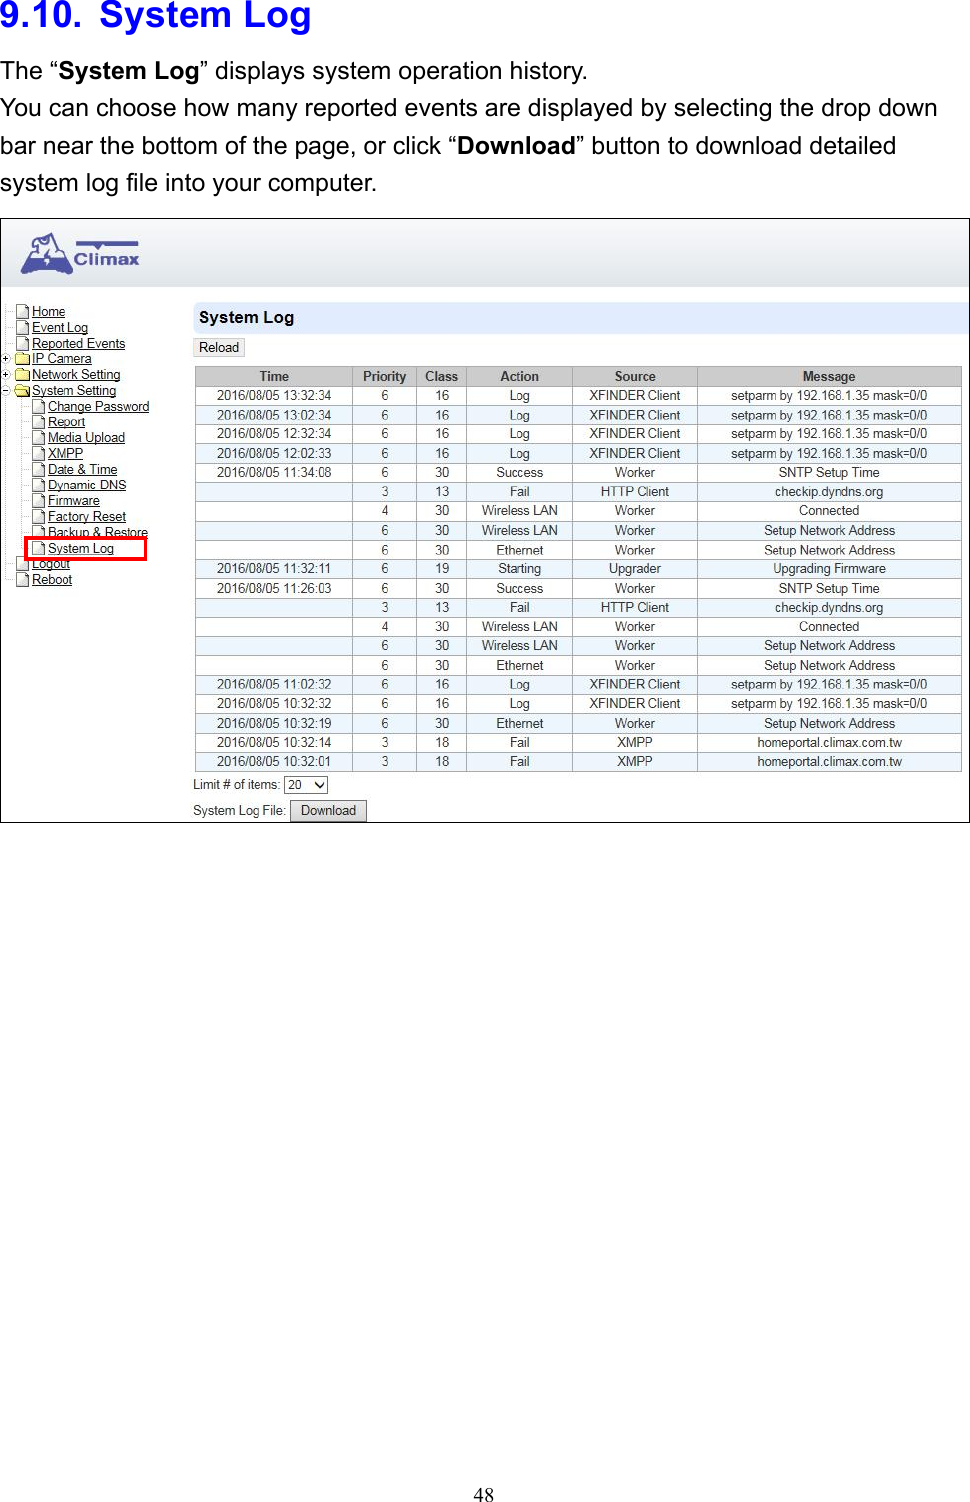 48  9.10.  System Log The “System Log” displays system operation history. You can choose how many reported events are displayed by selecting the drop down bar near the bottom of the page, or click “Download” button to download detailed system log file into your computer.                   